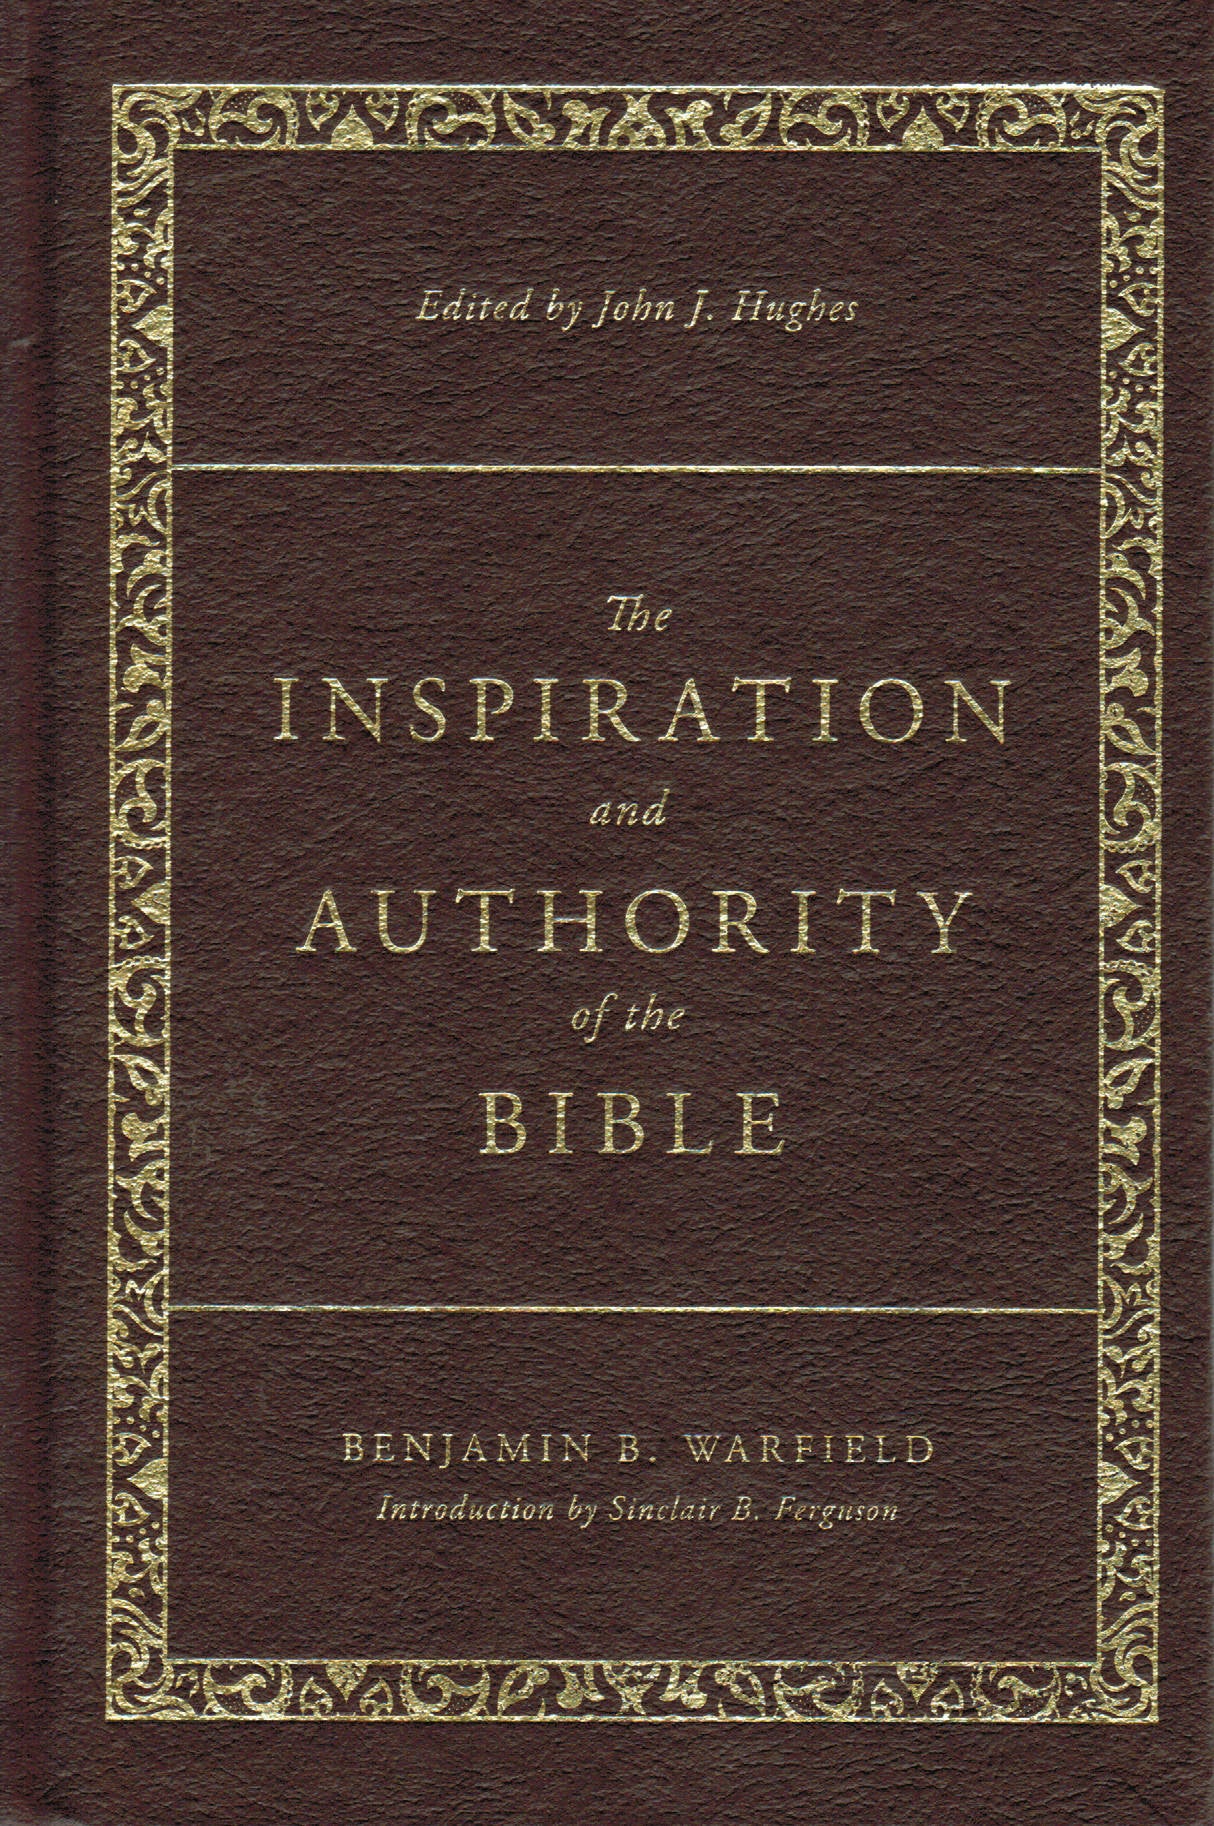 The Classic Warfield Collection - The Inspiration and Authority of the Bible